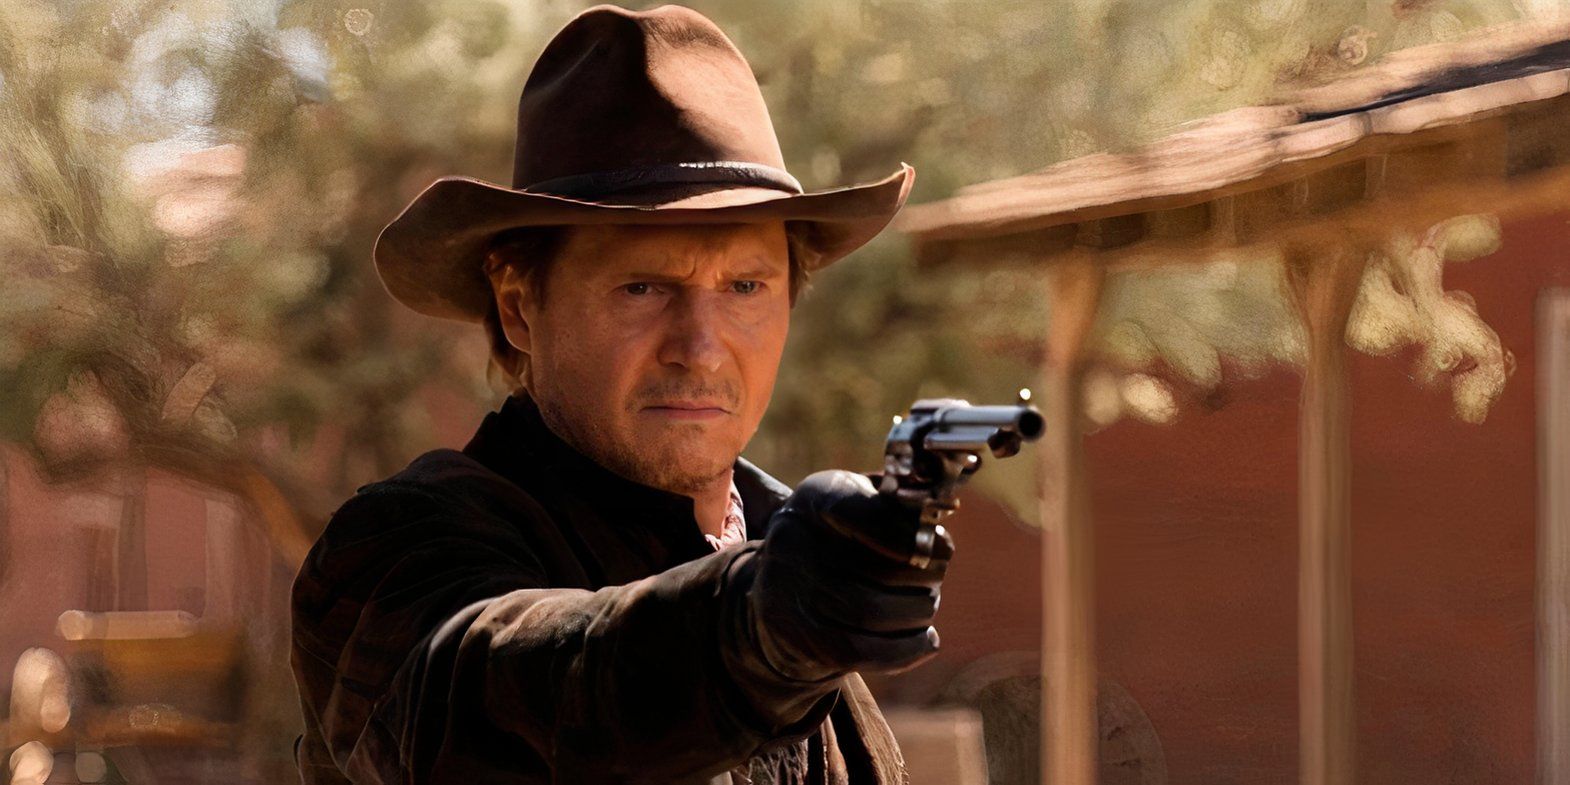 Liam Neeson as Clinch Leatherwood Pointing a Gun in A Million Ways to Die in the West